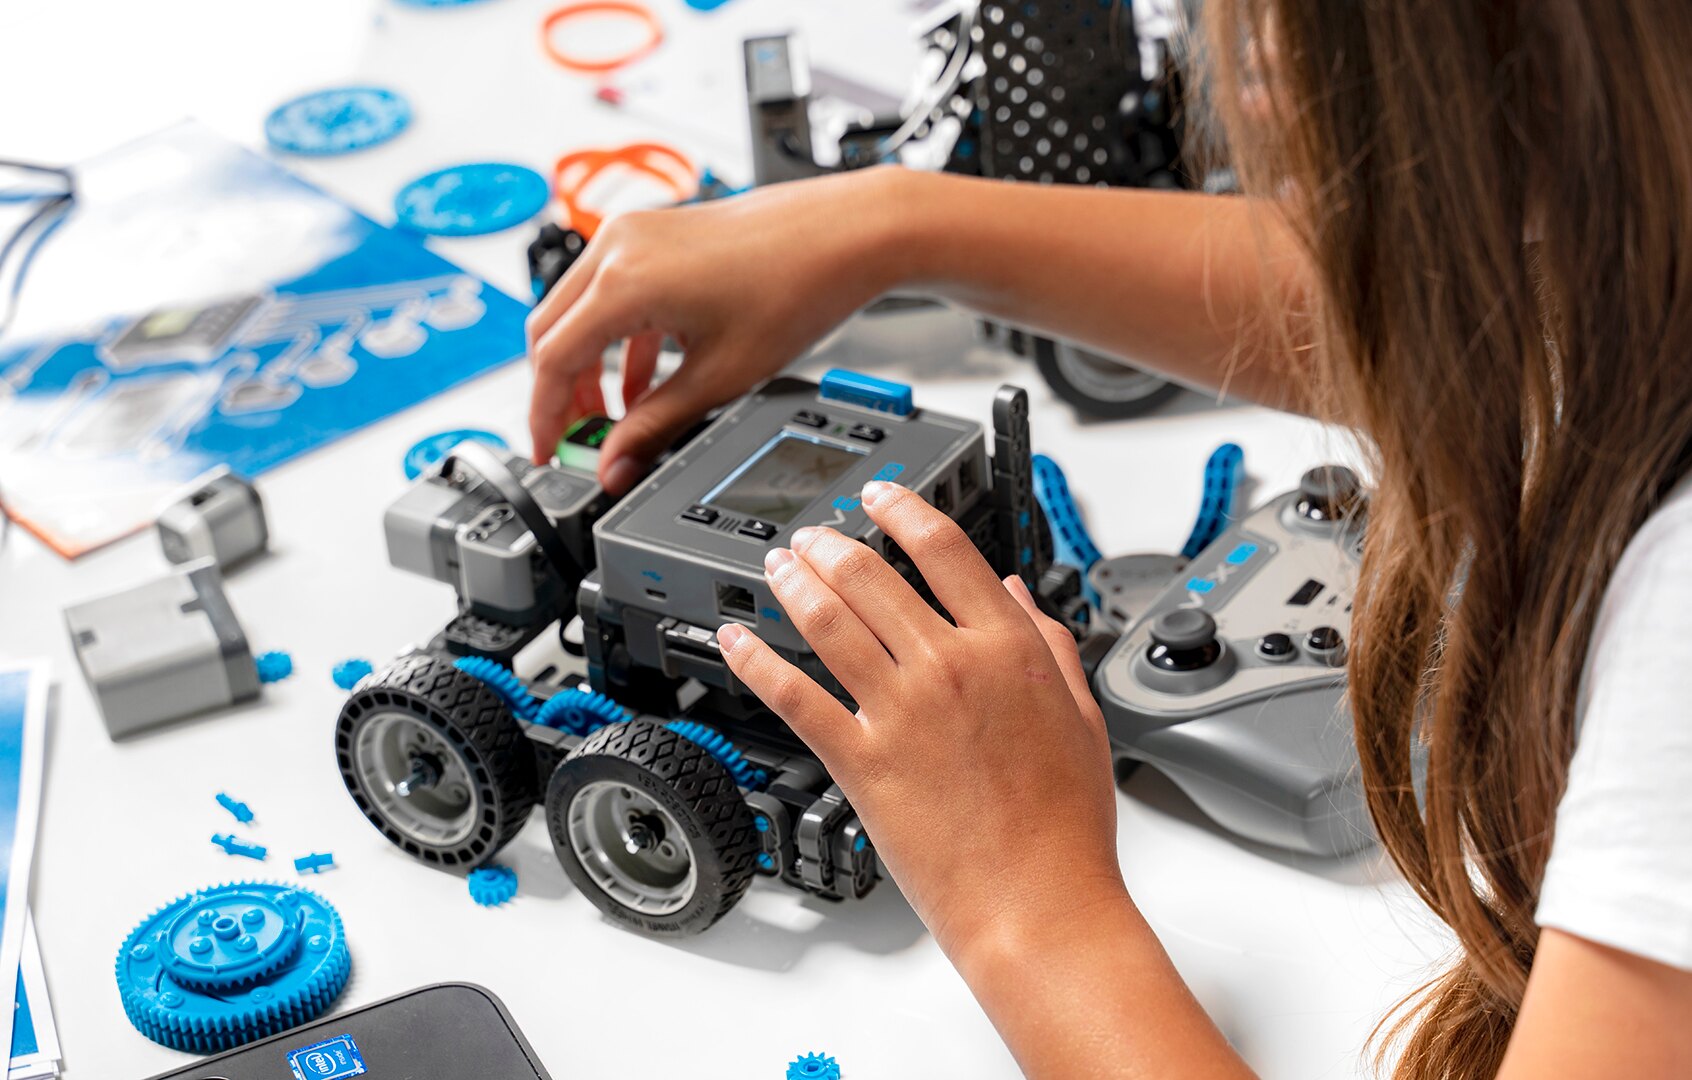 The Art of Assembly: Building a World of Fun with Construction Toys